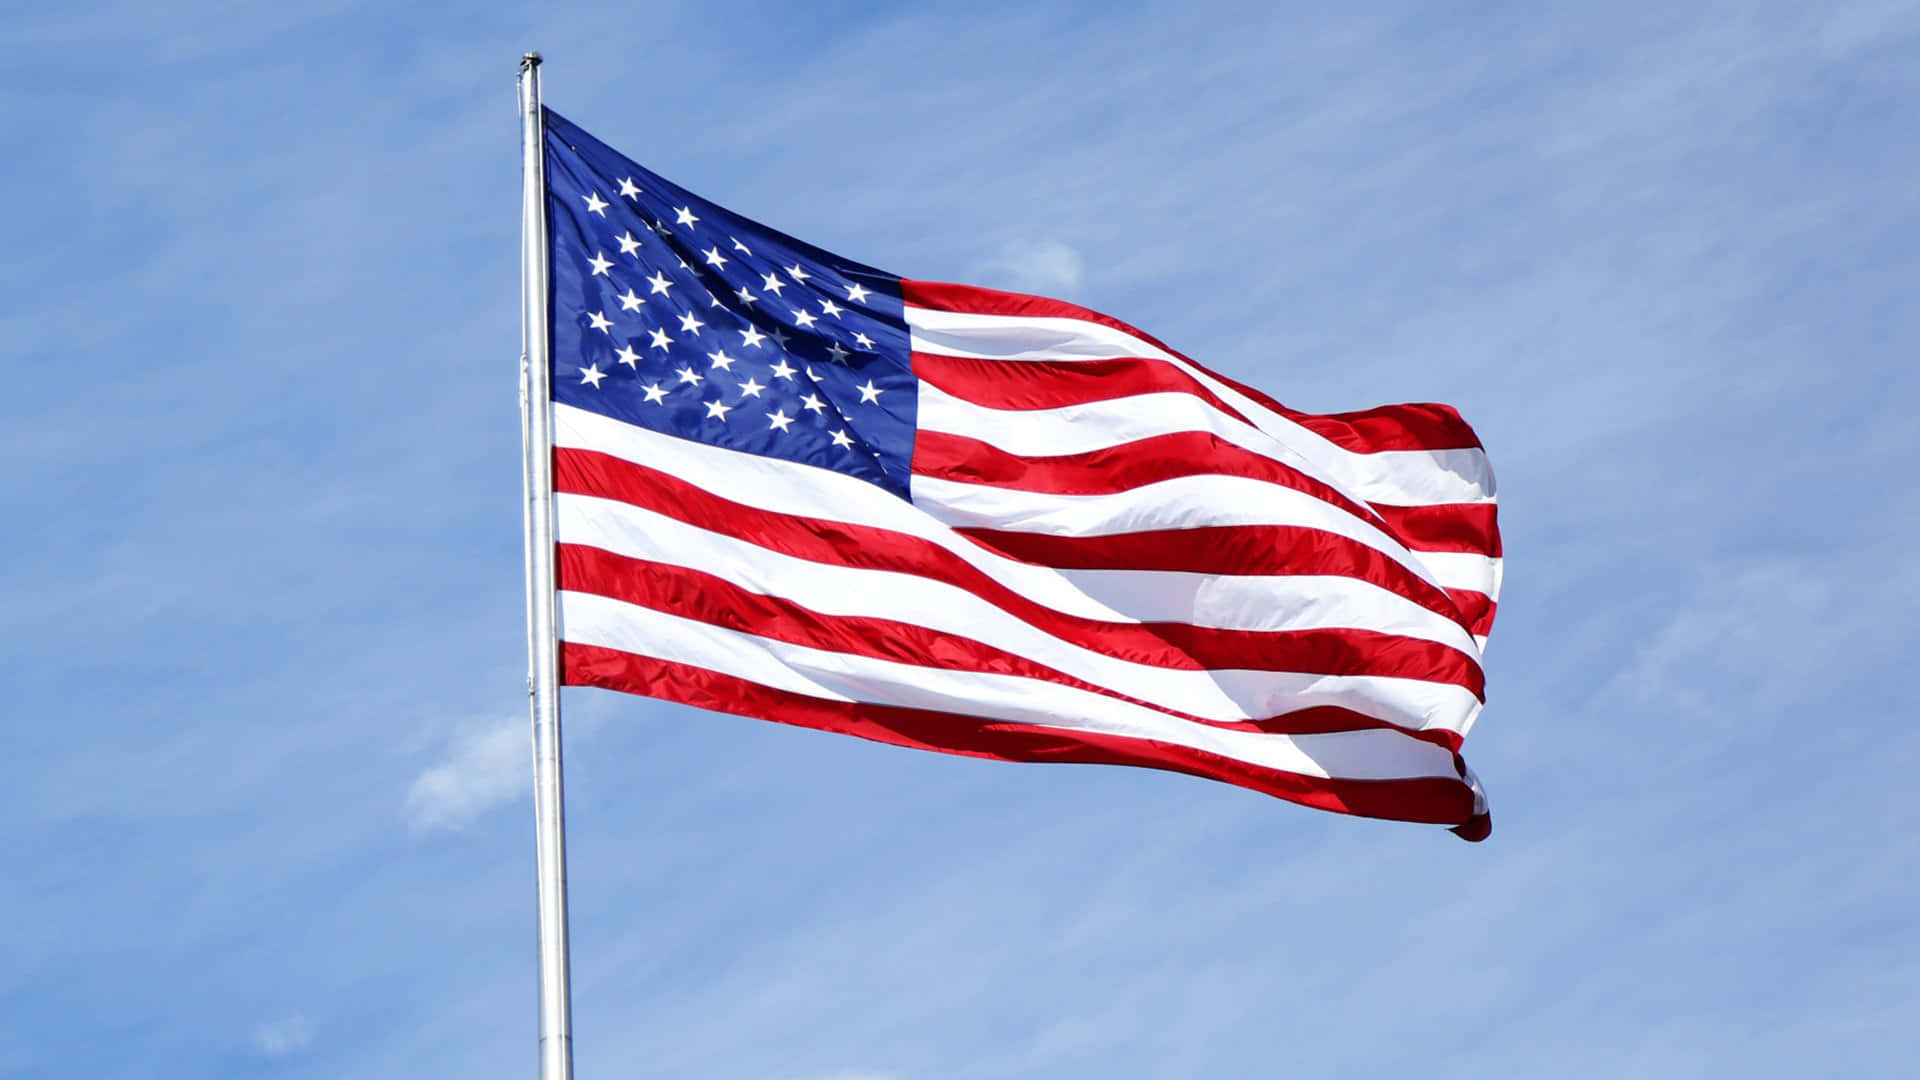 A photograph of the iconic American flag waving against a clear blue sky